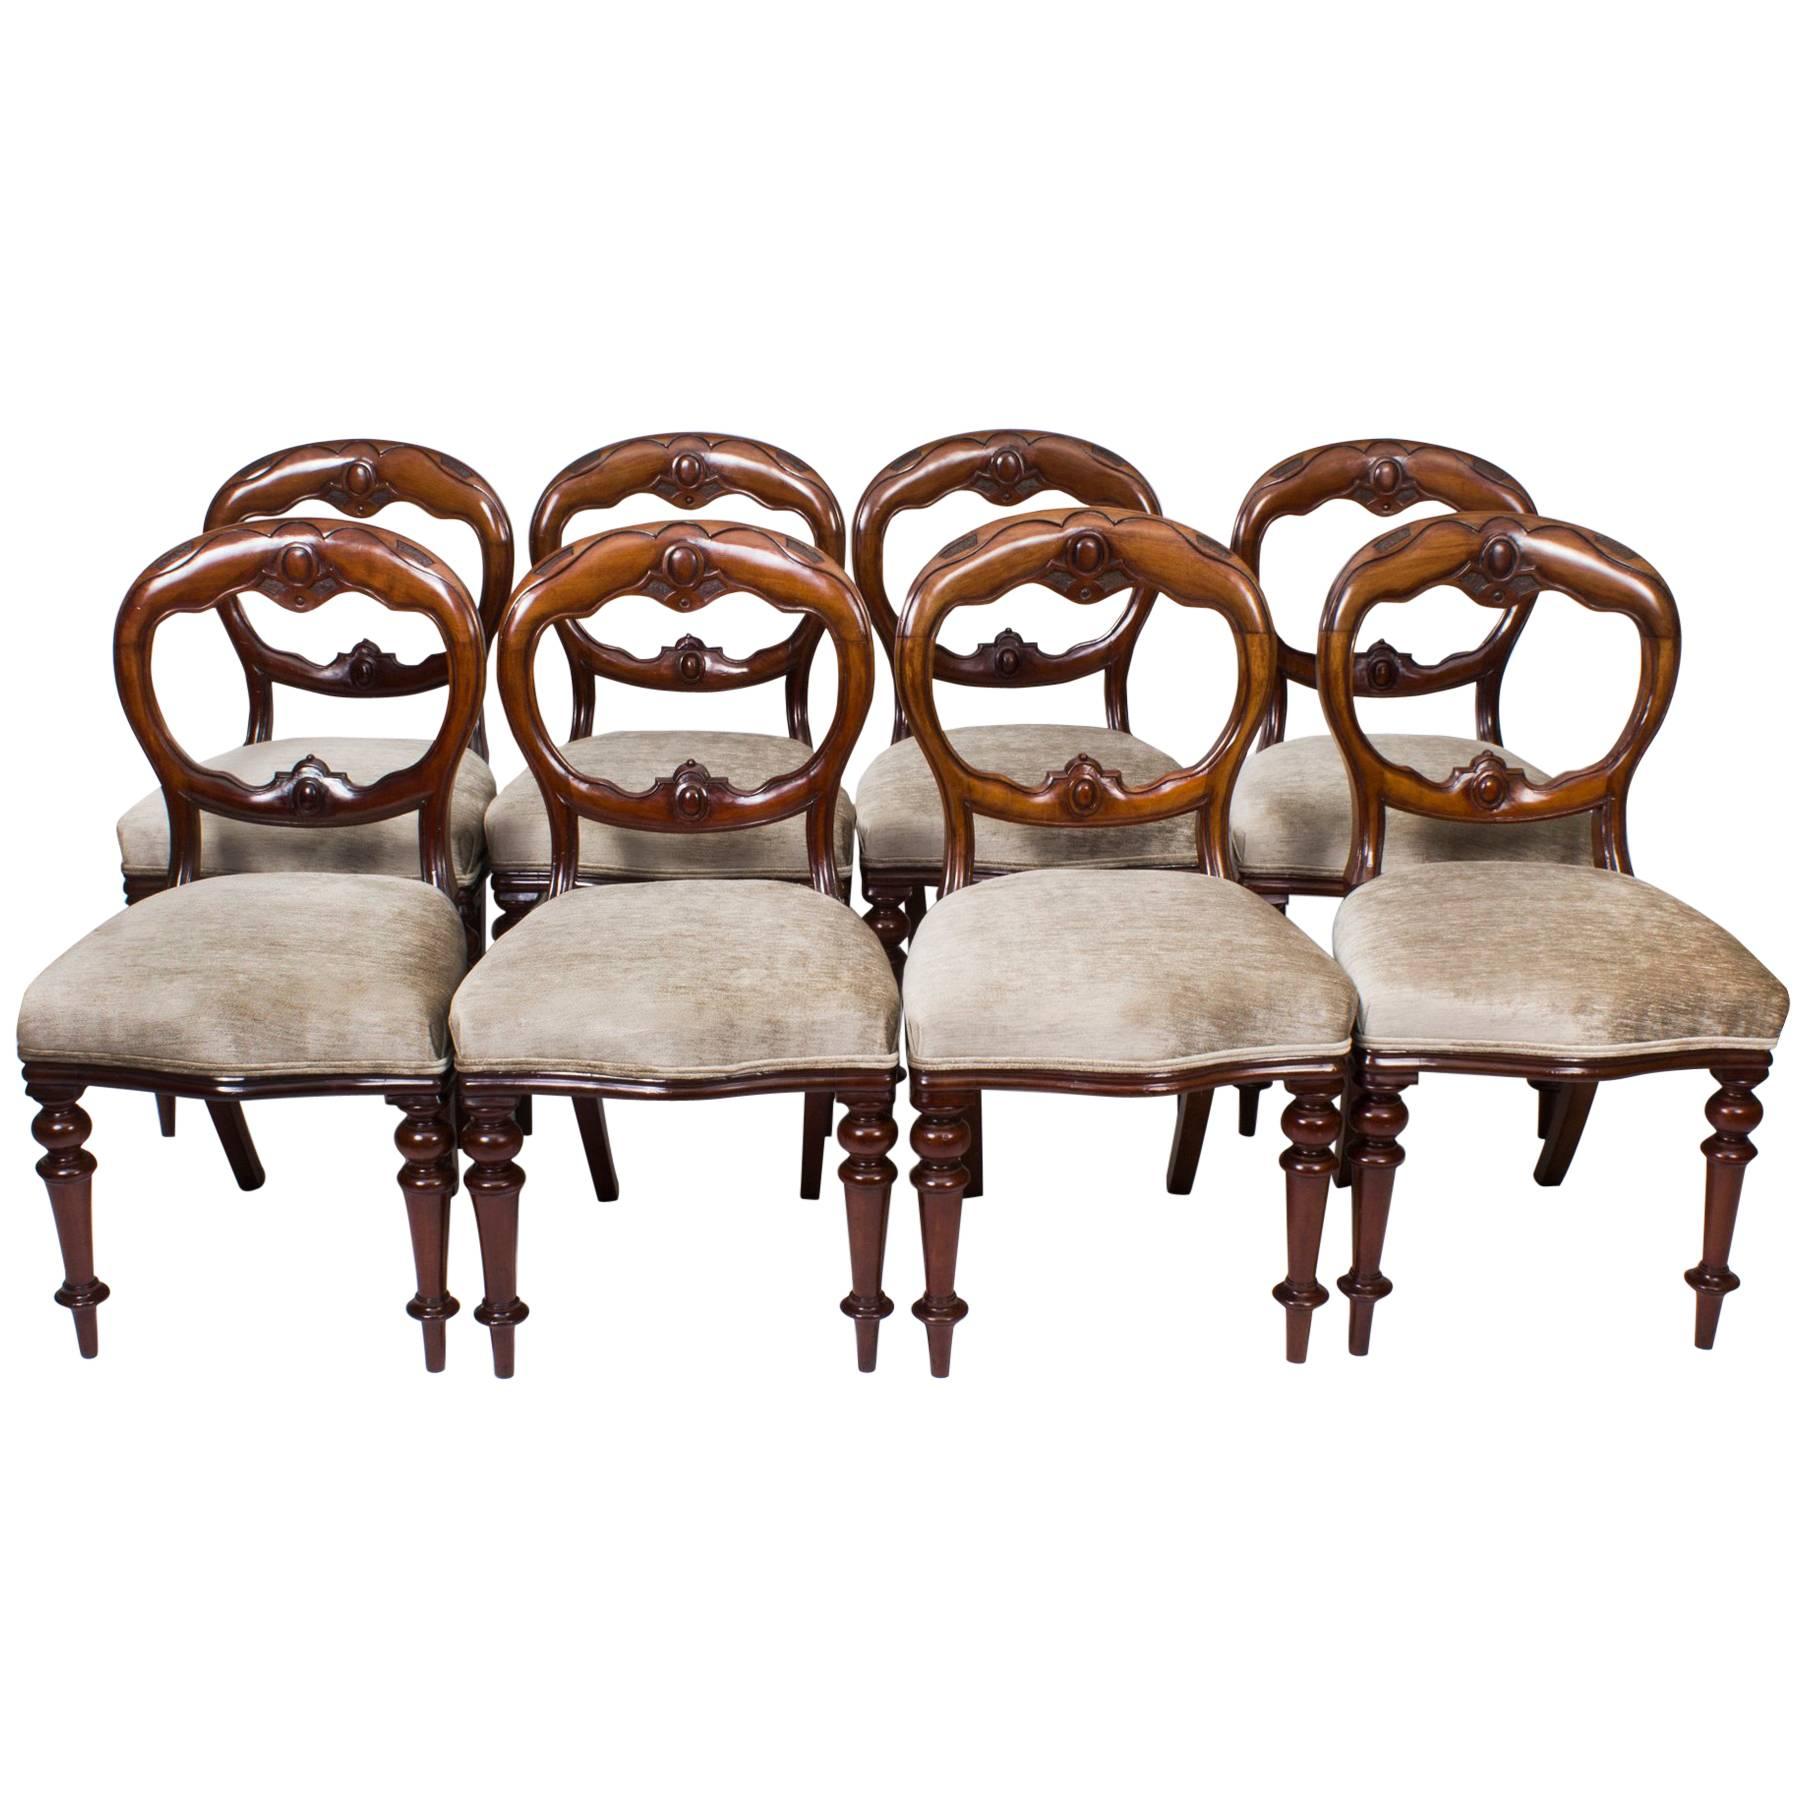 19th Century Set of Eight Victorian Balloon Back Mahogany Dining Chairs